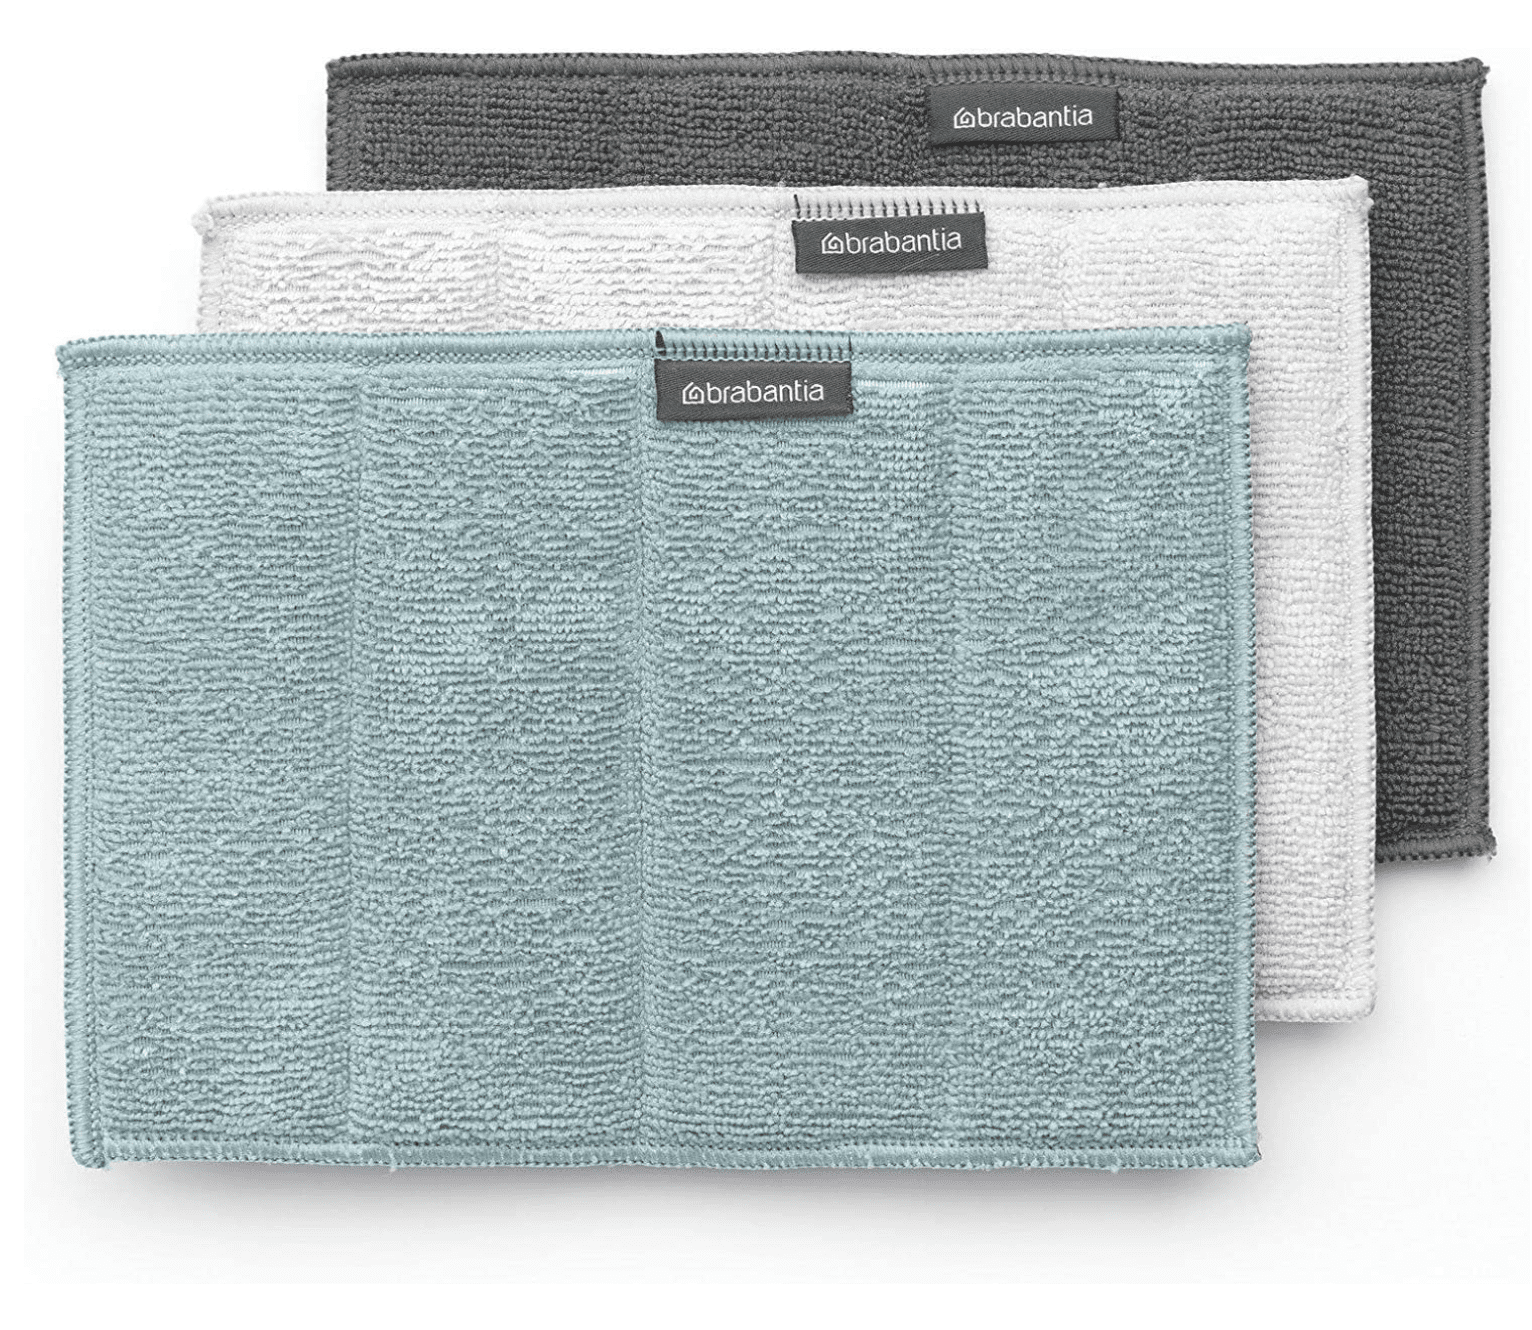 5 Of The Best Dishwashing Cloth Options For You